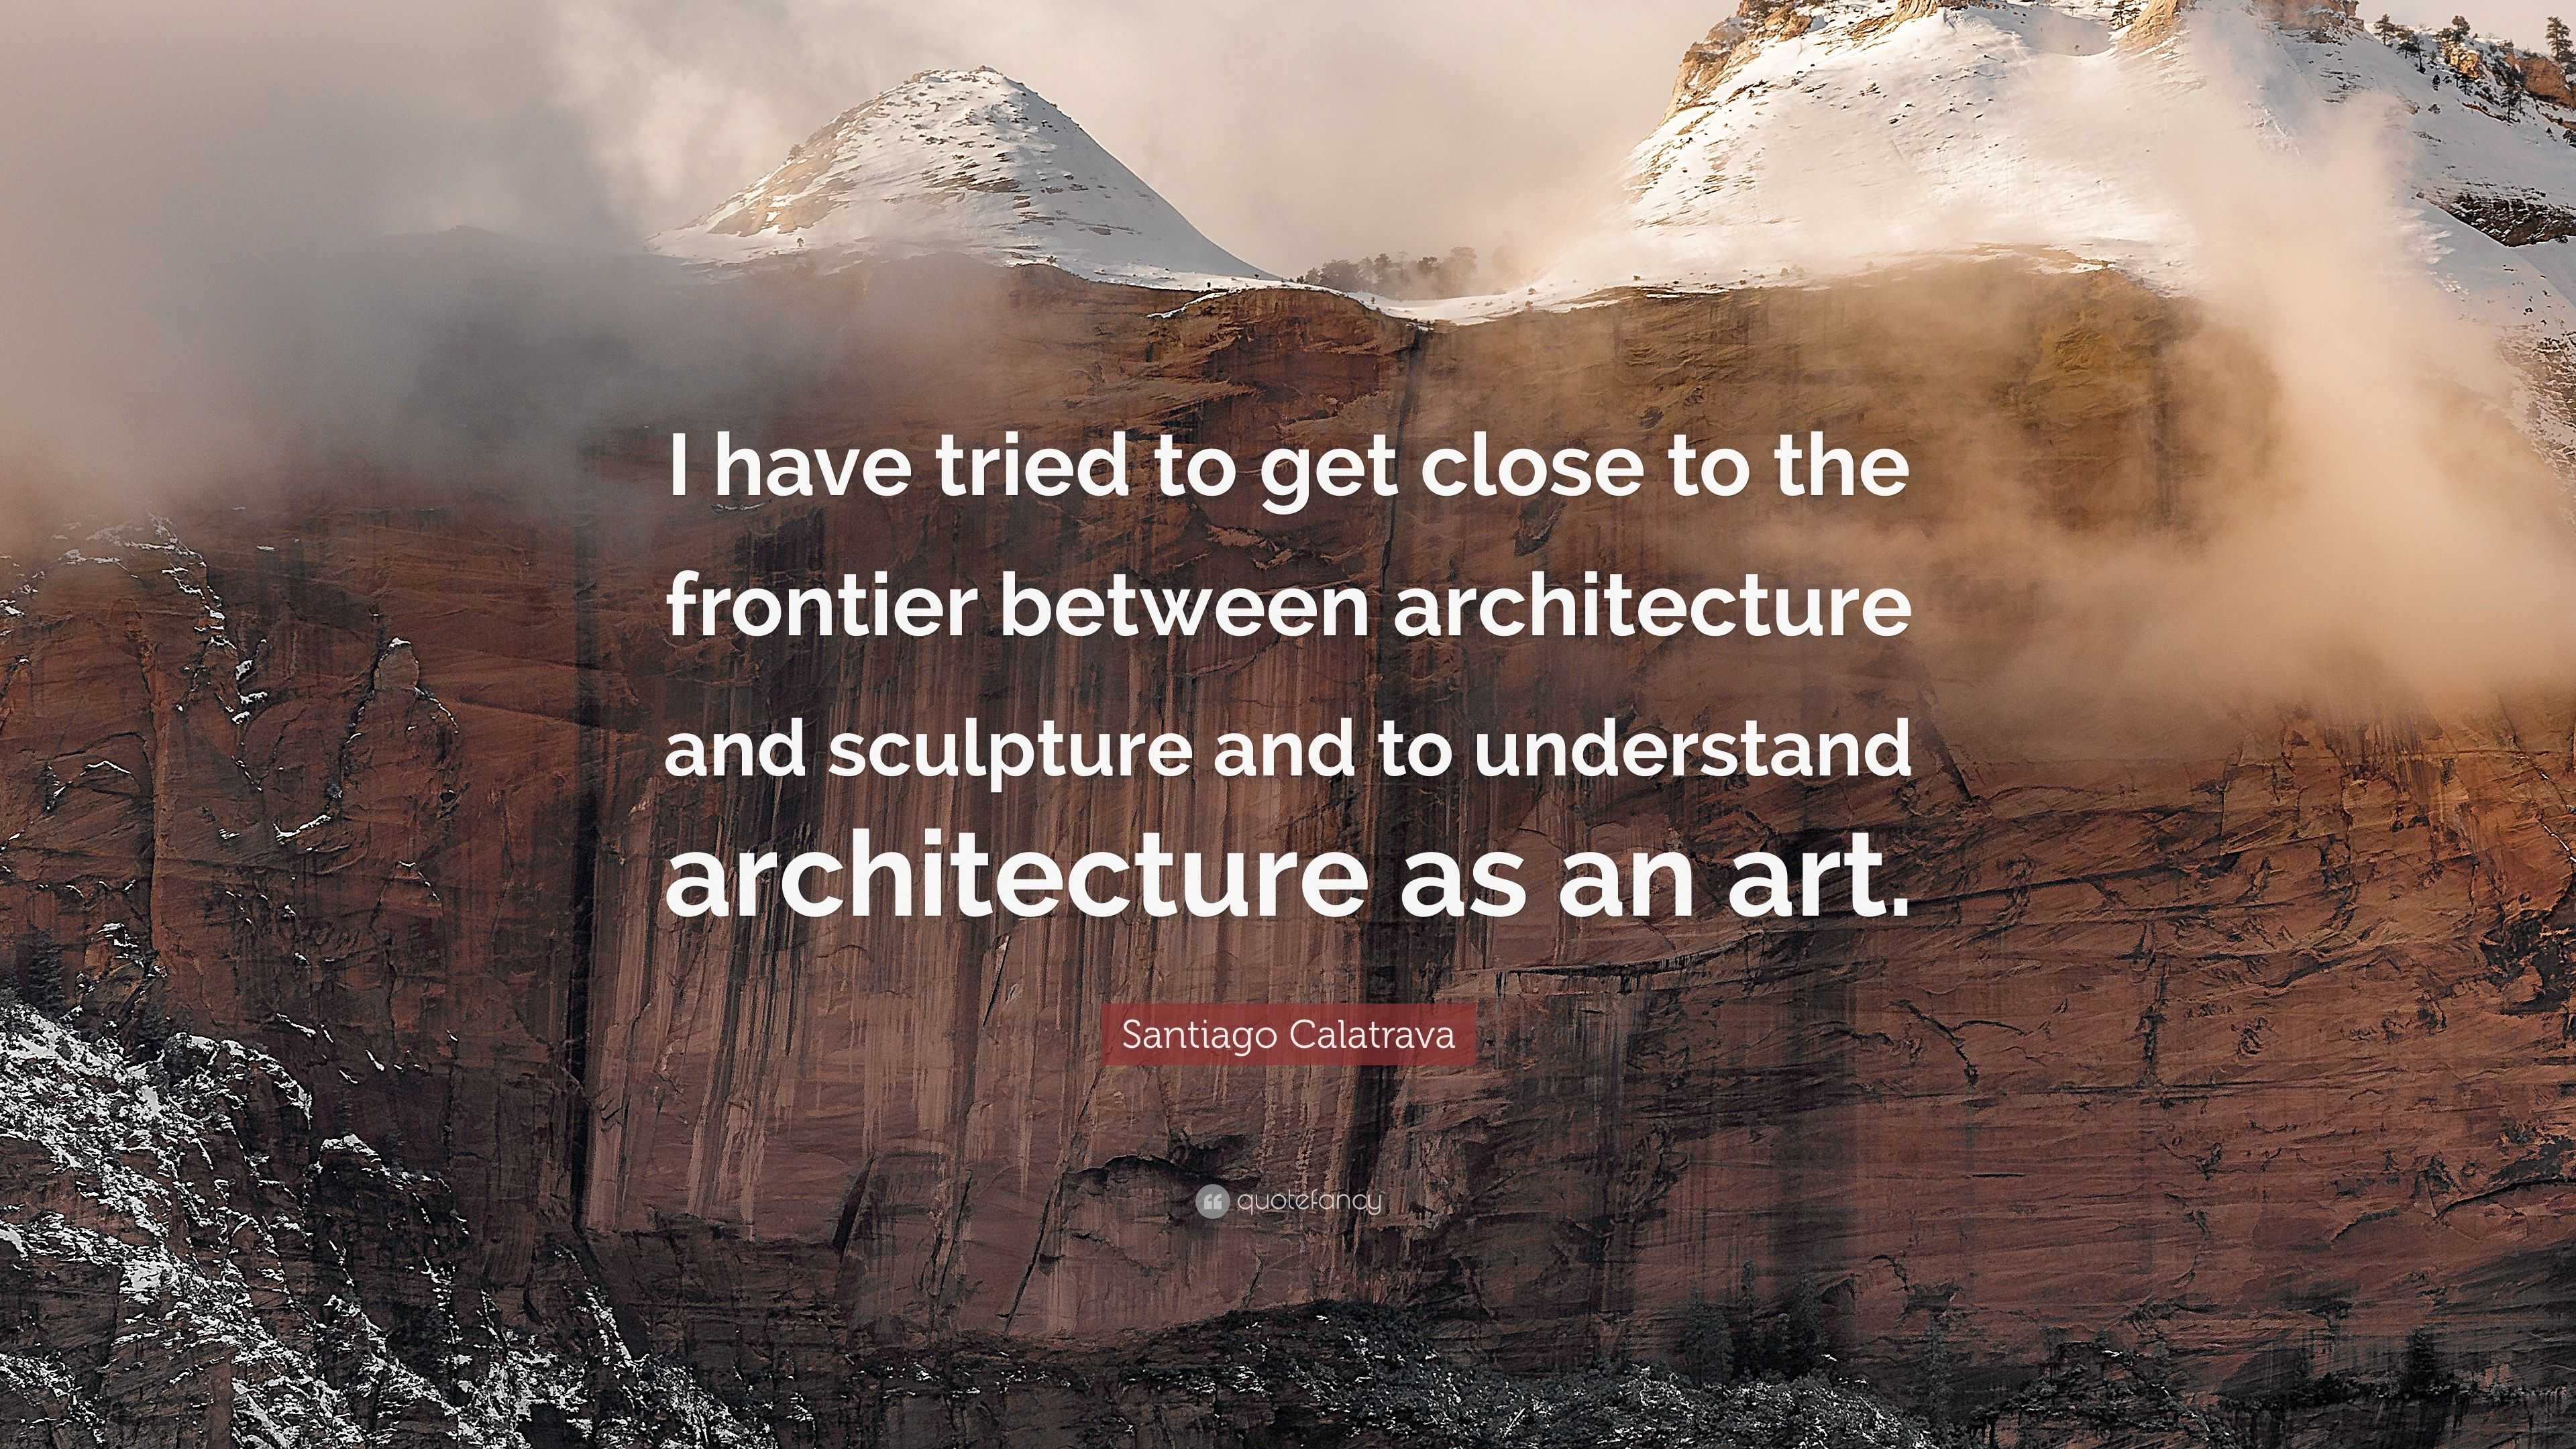 Santiago Calatrava Quote: “I have tried to get close to the frontier ...